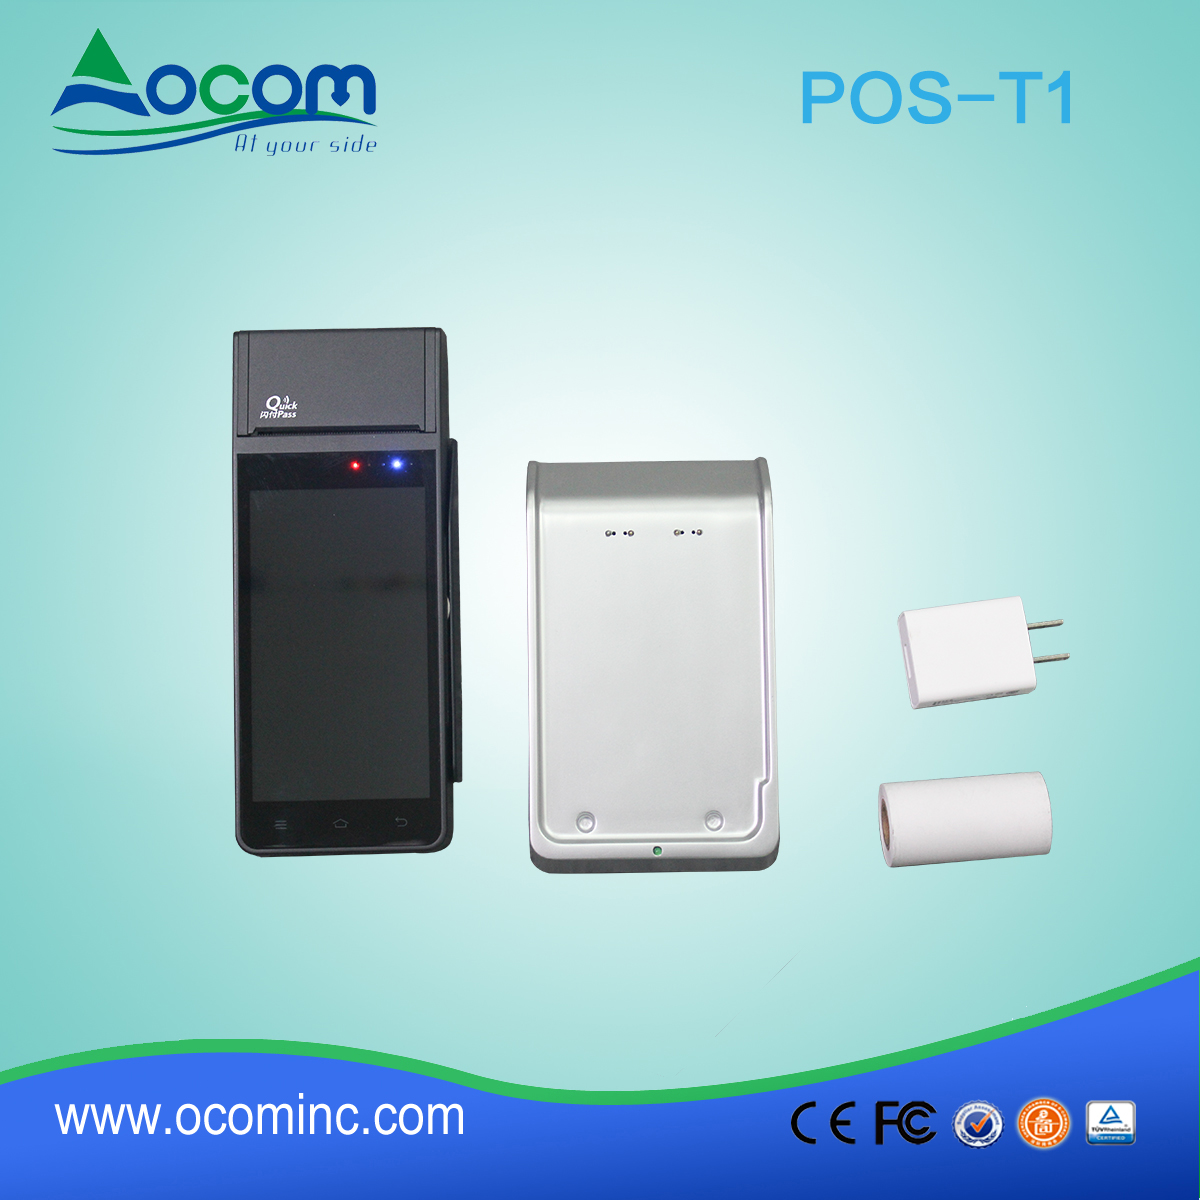 (POS-Z90) New design portable POS machine with 58mm thermal printer